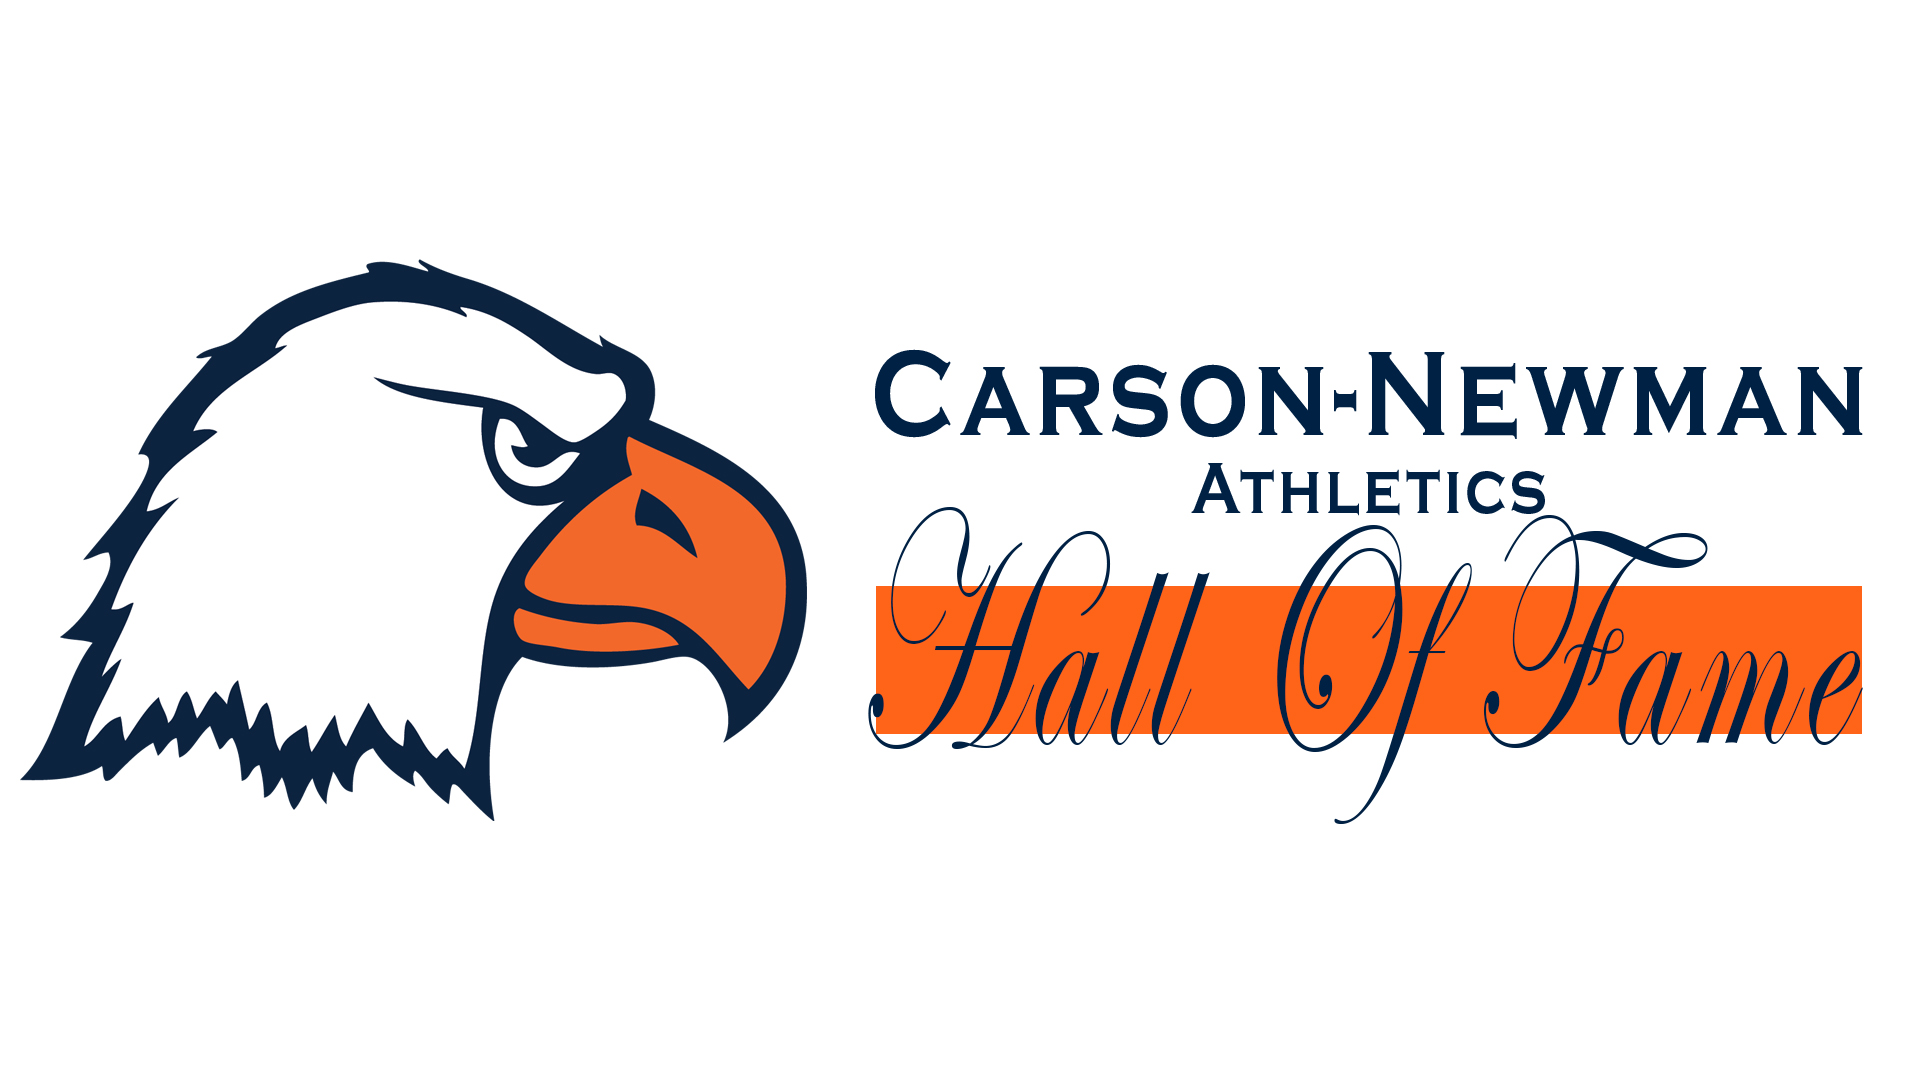 Ballot released for 2021 Carson-Newman Athletics Hall of Fame